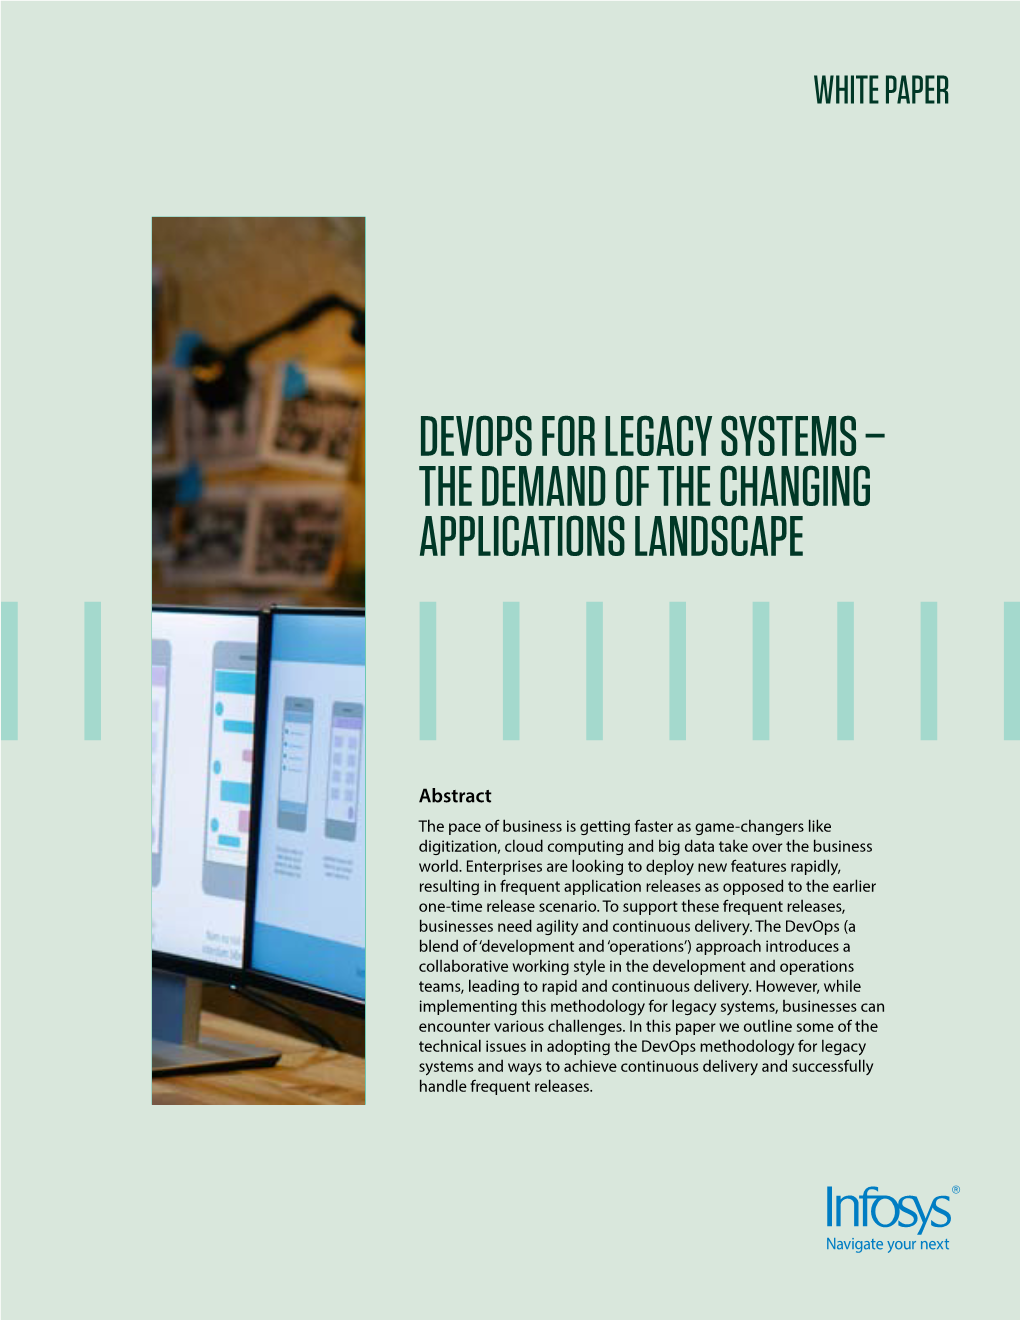 Devops for Legacy Systems – the Demand of the Changing Applications Landscape